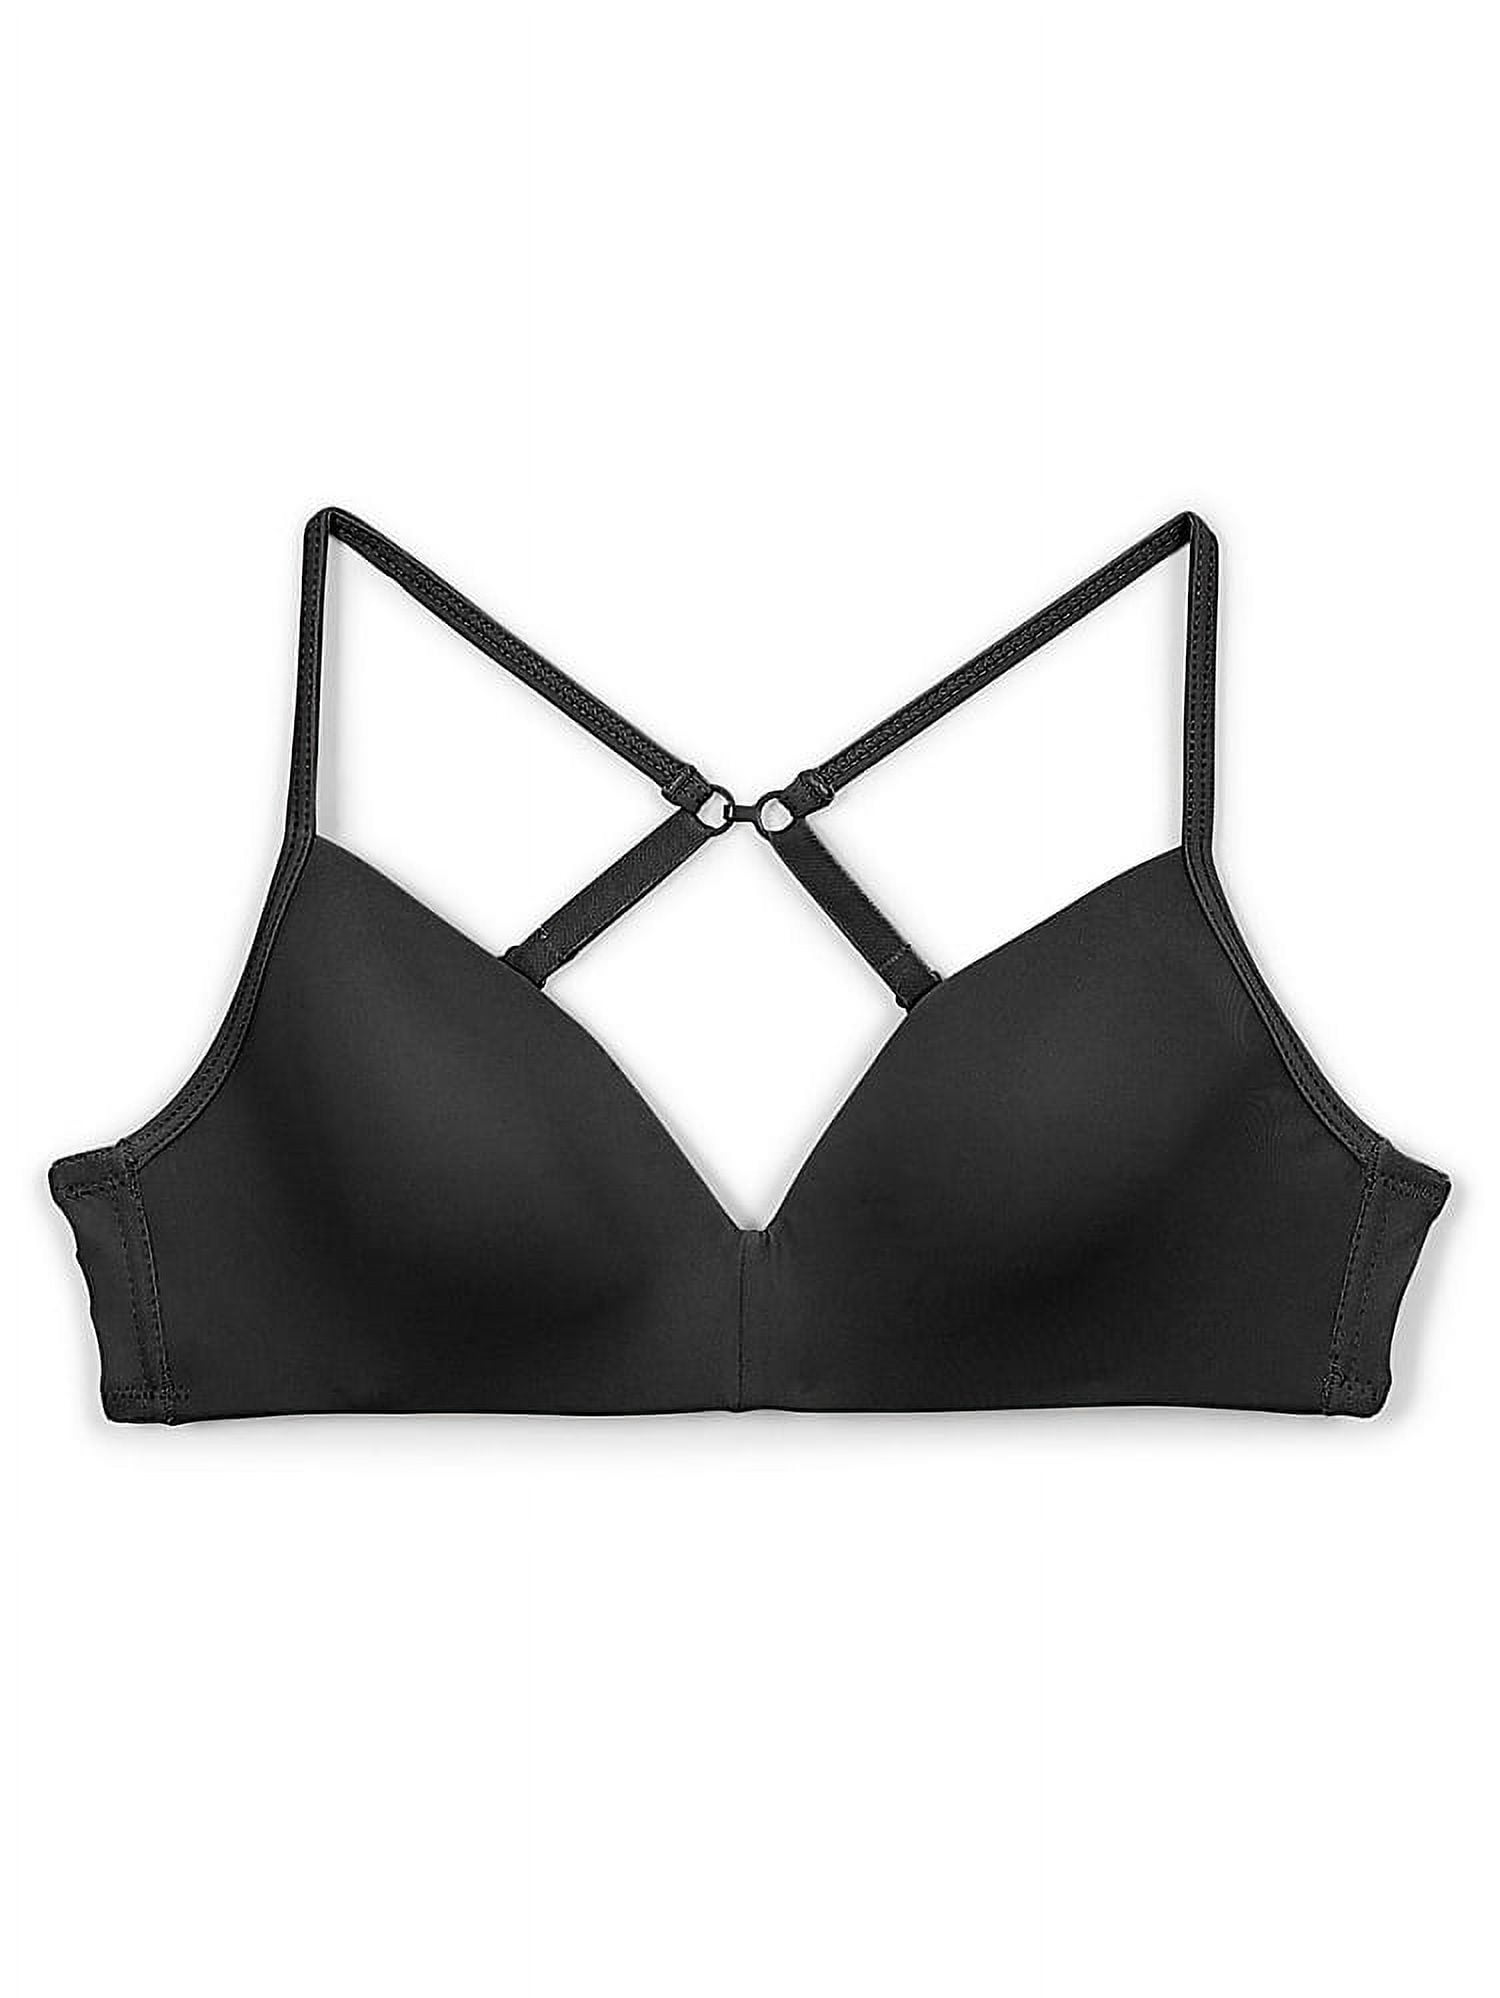 Maidenform® Girls' Molded Soft Cup Bra - Size - 30A - Color - Black